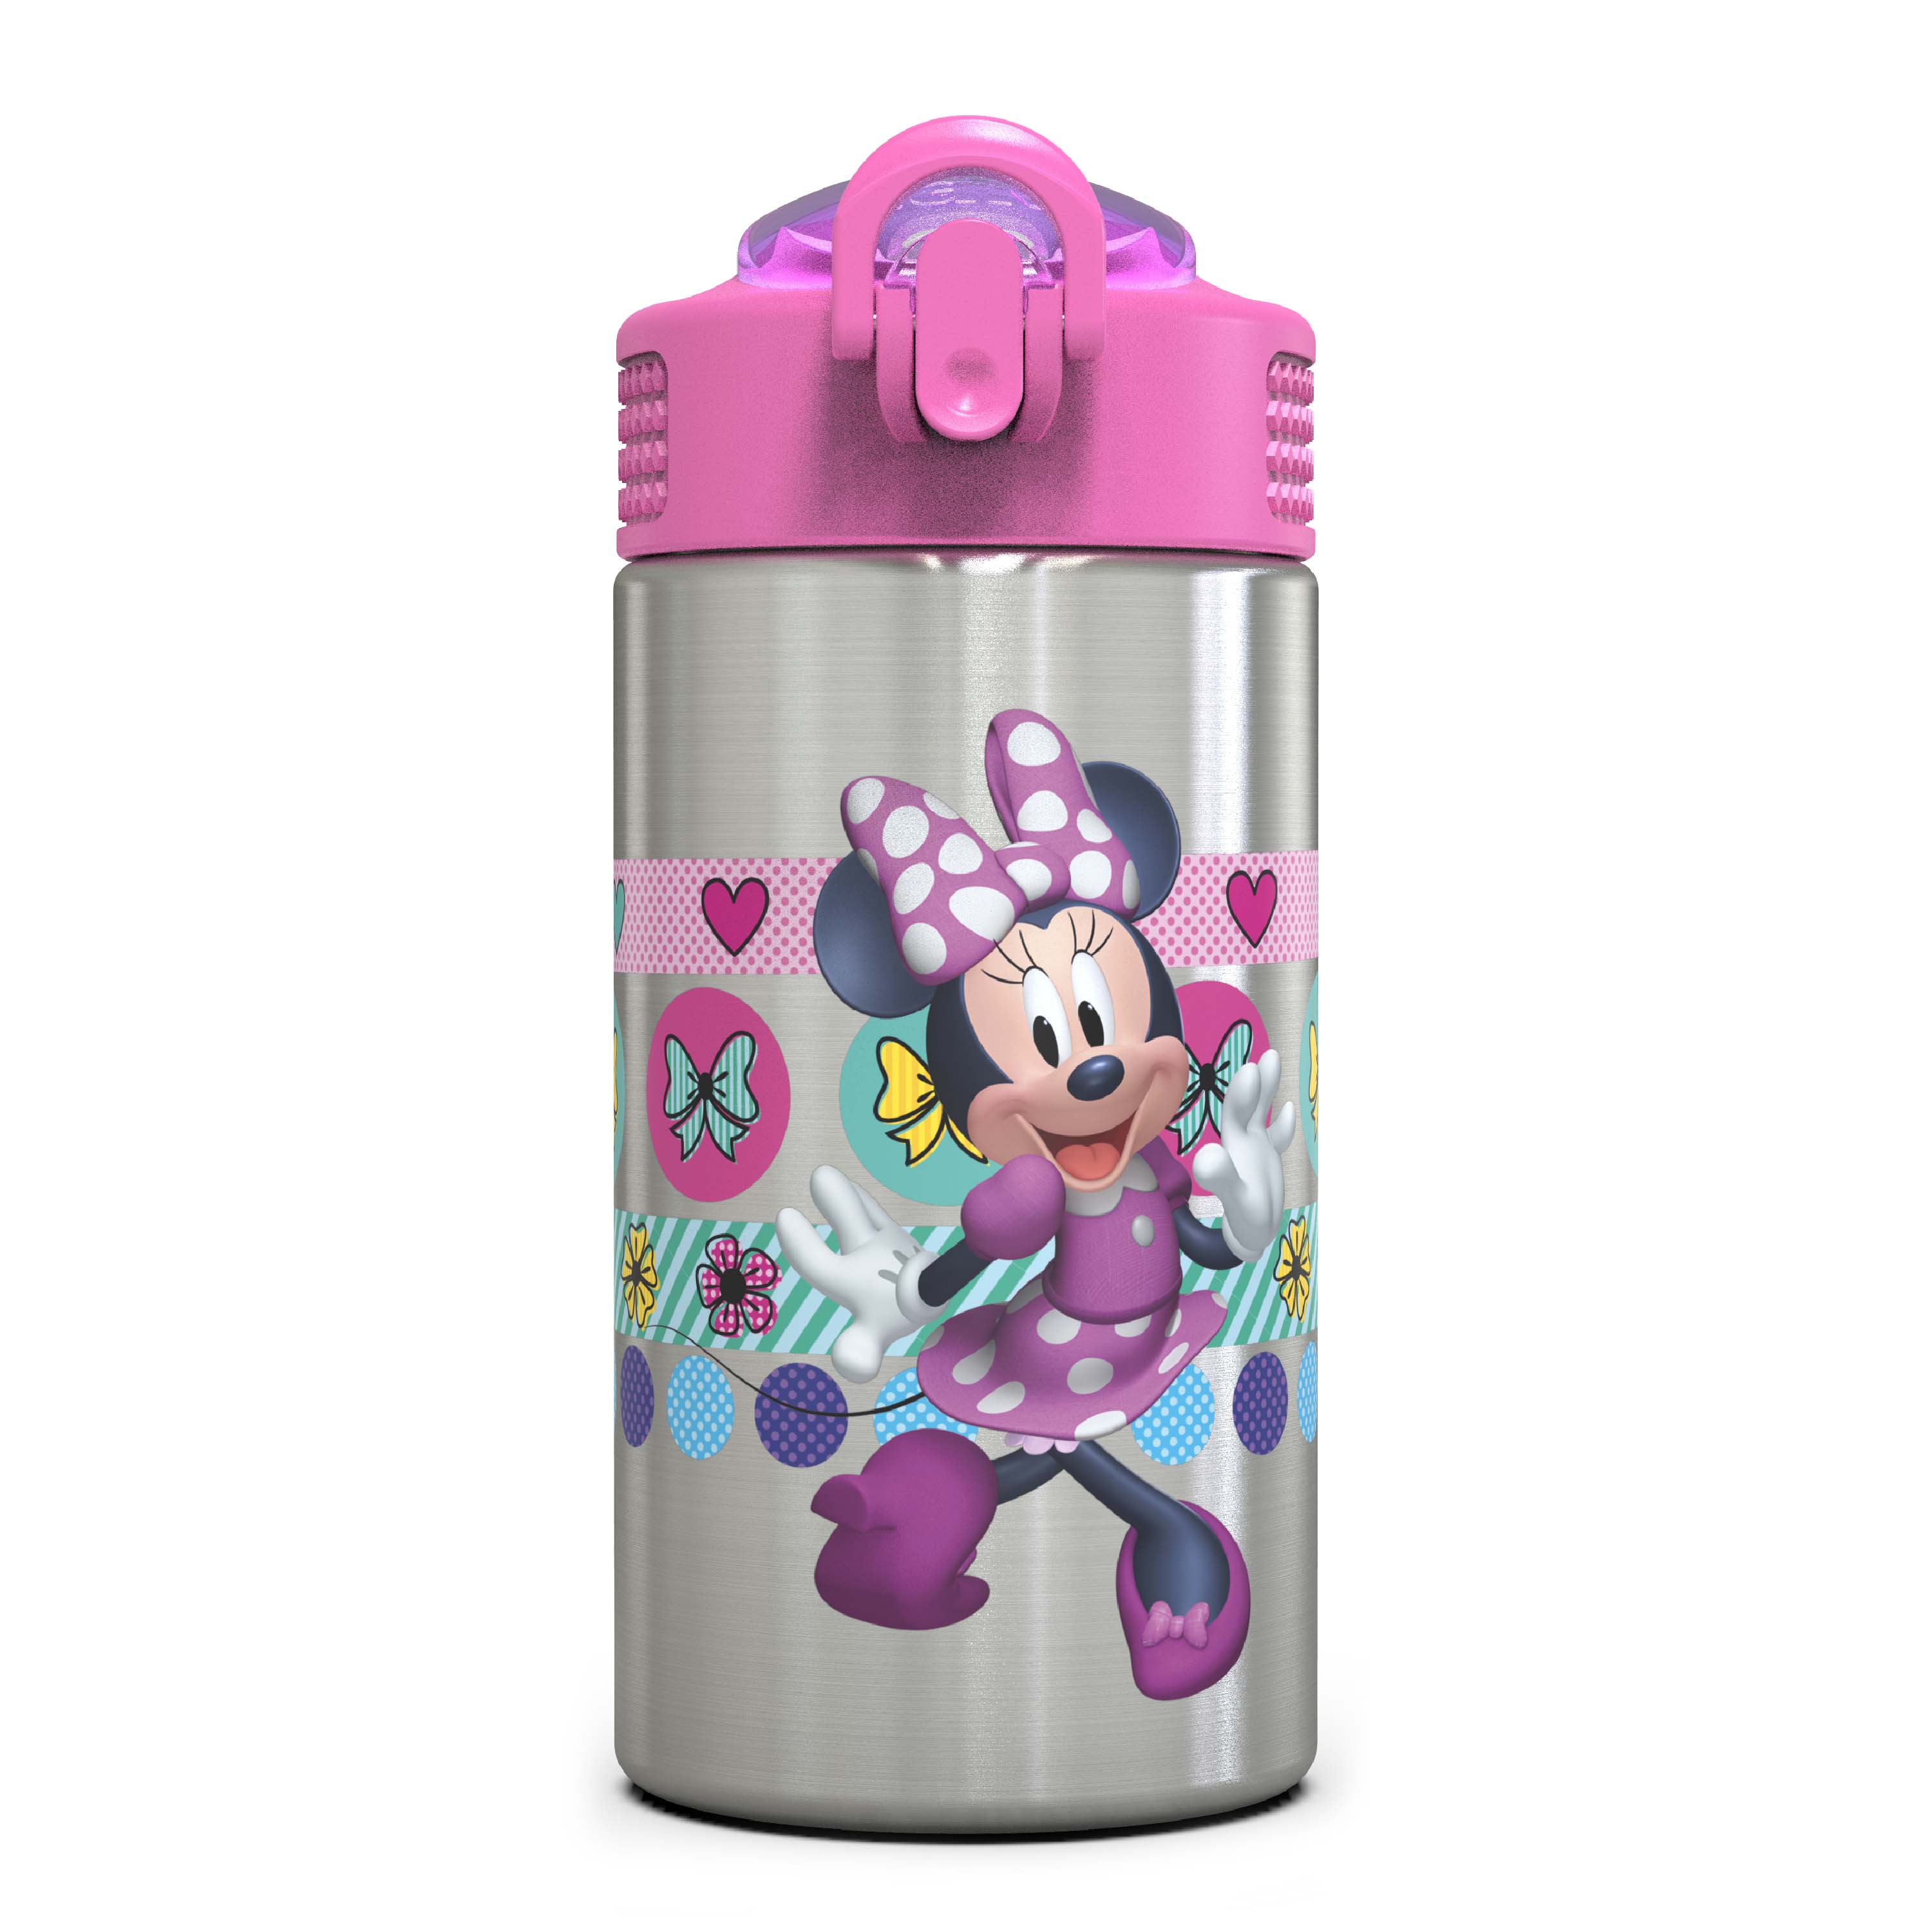 Disney 15.5 ounce Water Bottle, Minnie Mouse & Daisy Duck slideshow image 1